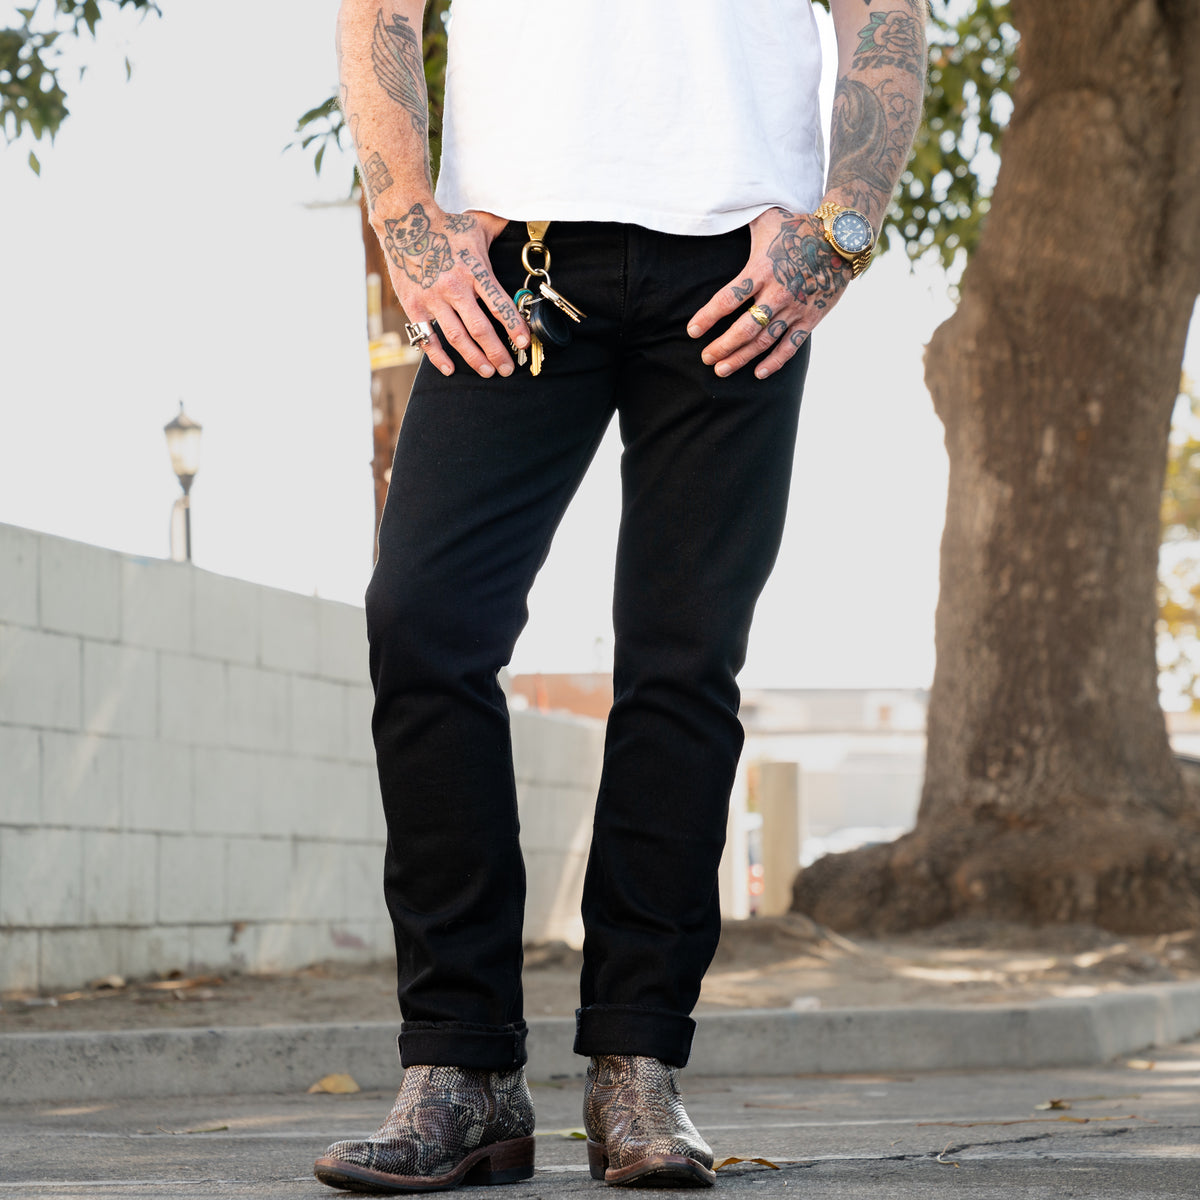 The Flat Head Jeans Straight Black Tapered